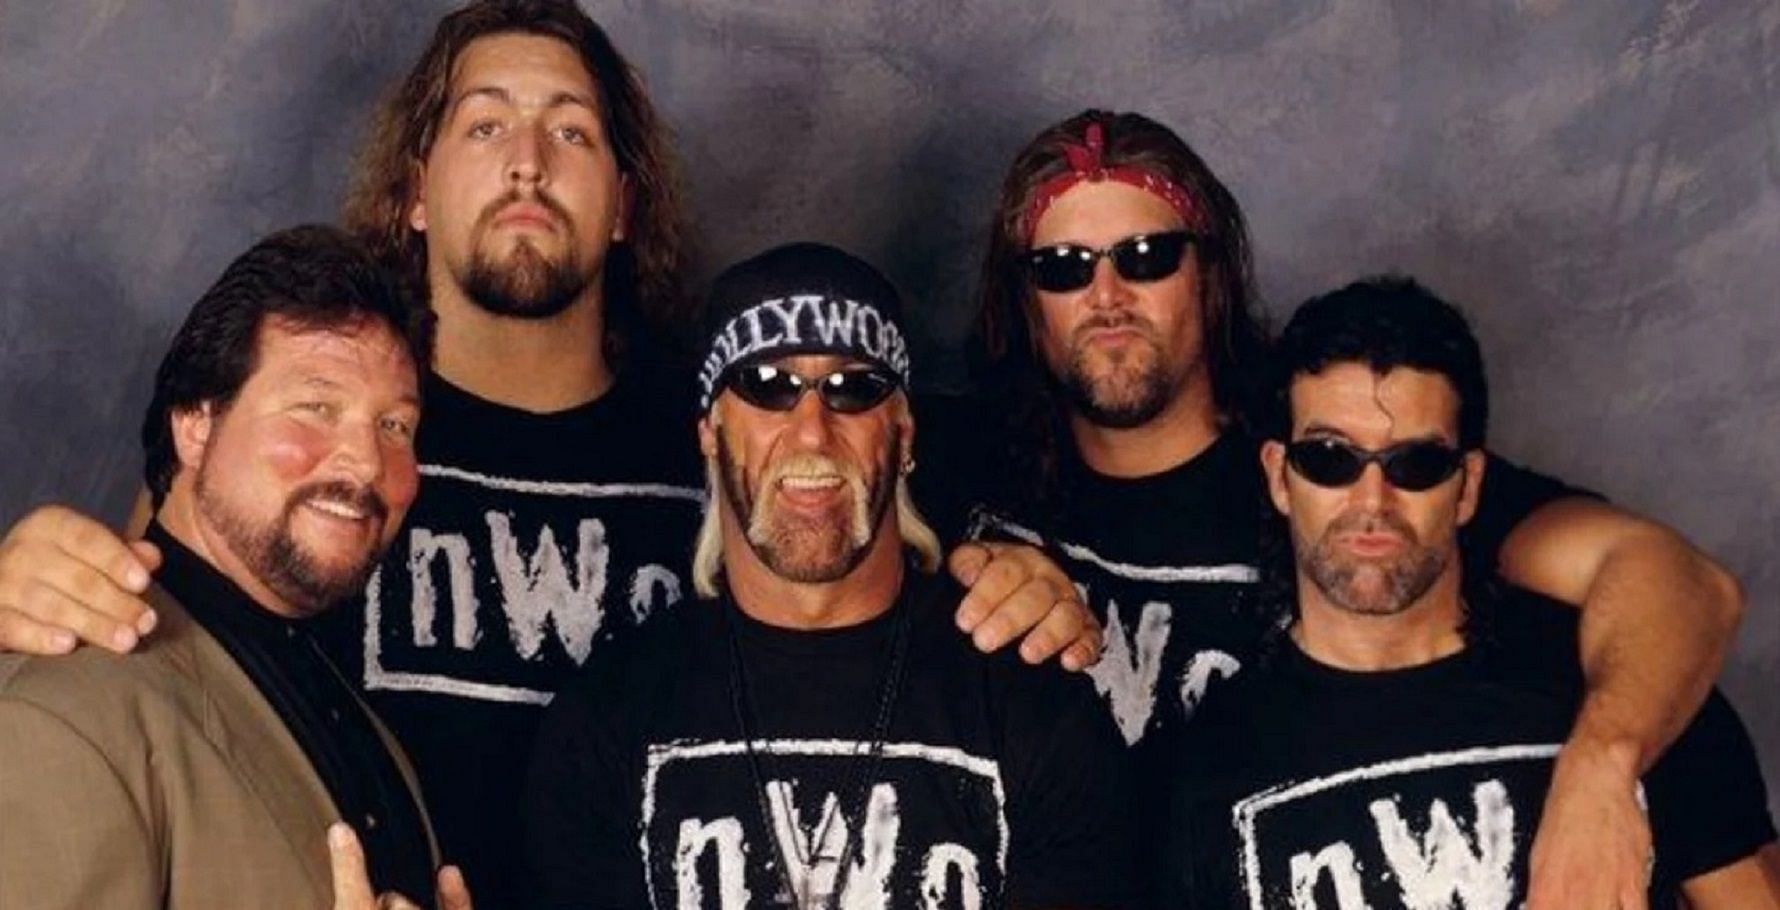 nWo was inducted in the WWE Hall of Fame in 2020